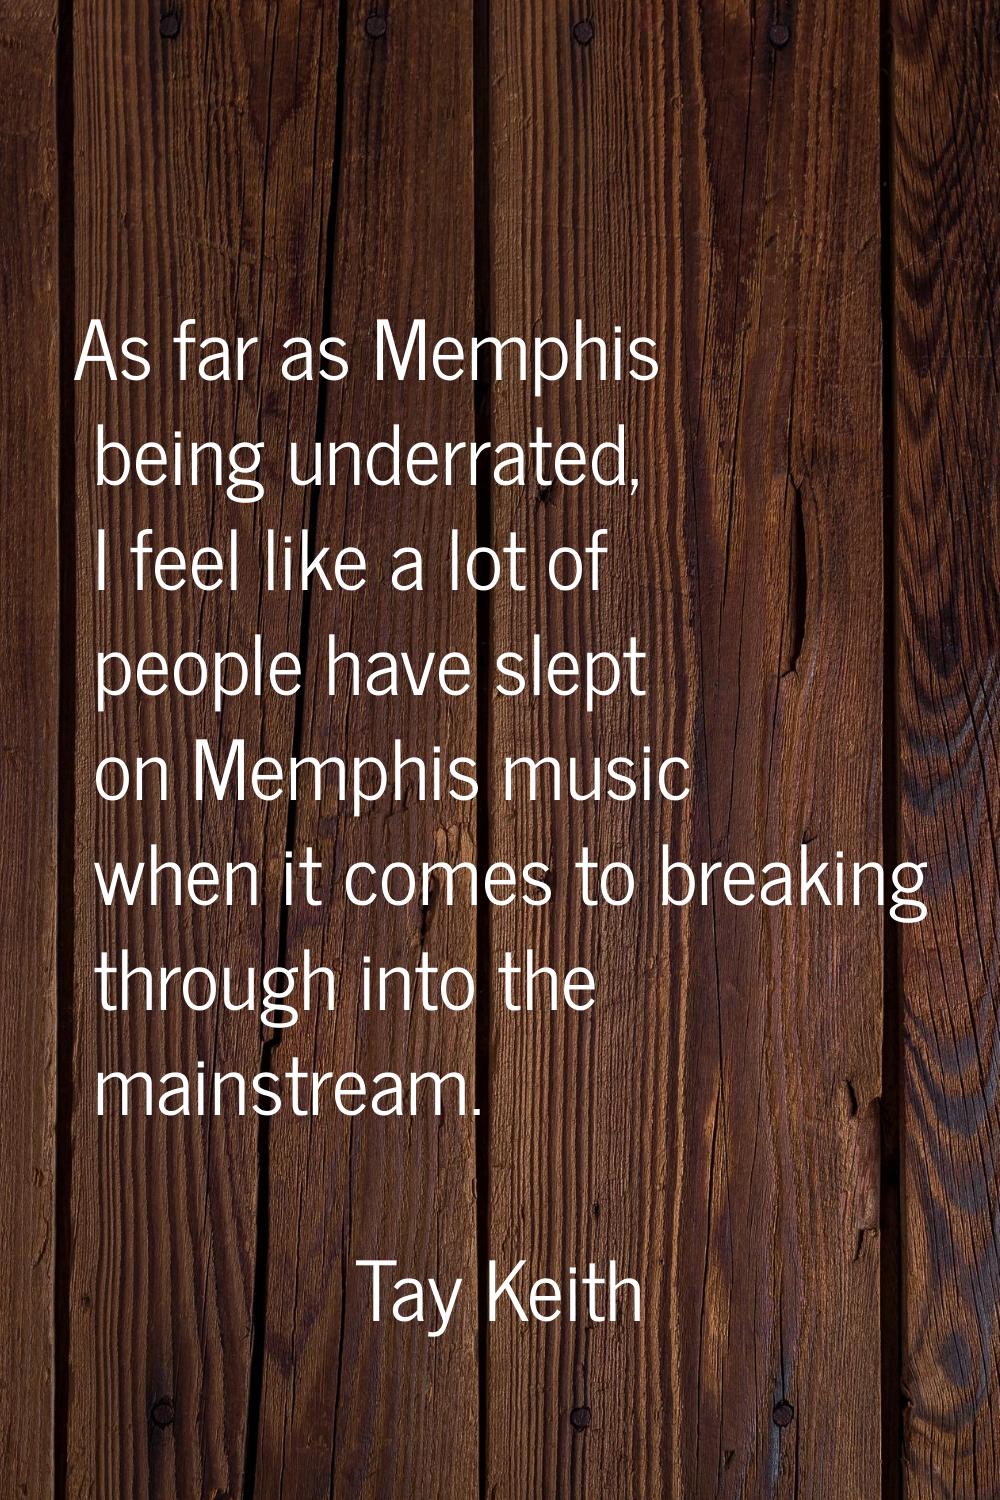 As far as Memphis being underrated, I feel like a lot of people have slept on Memphis music when it